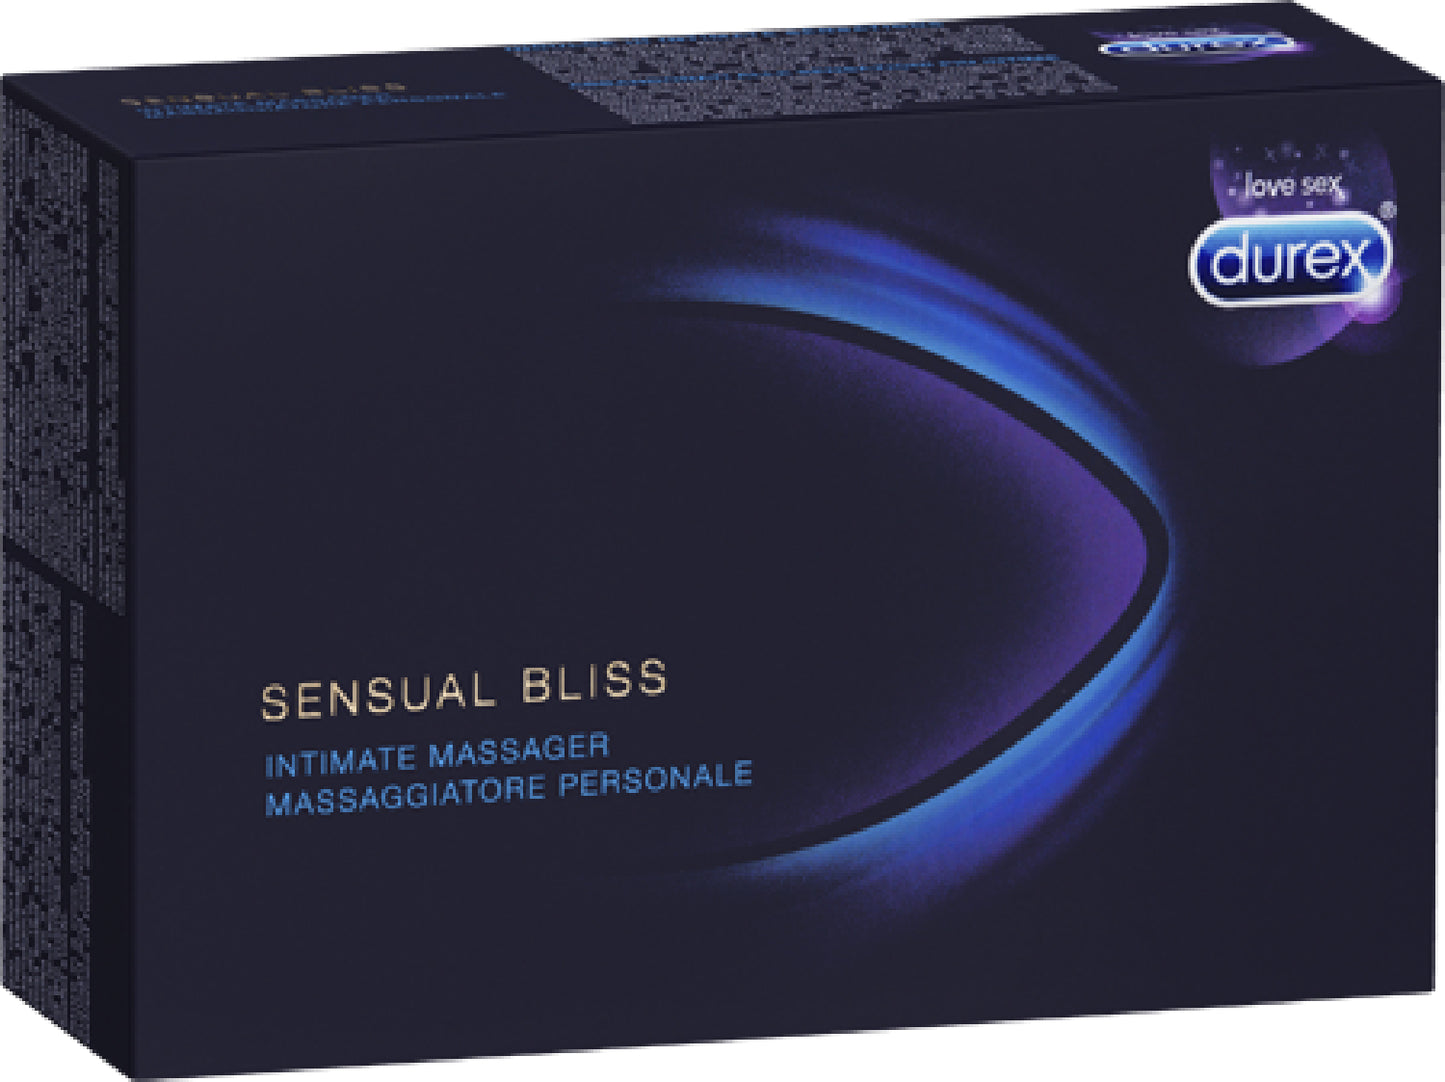 Sensual Bliss Intimate Massager - One Stop Adult Shop